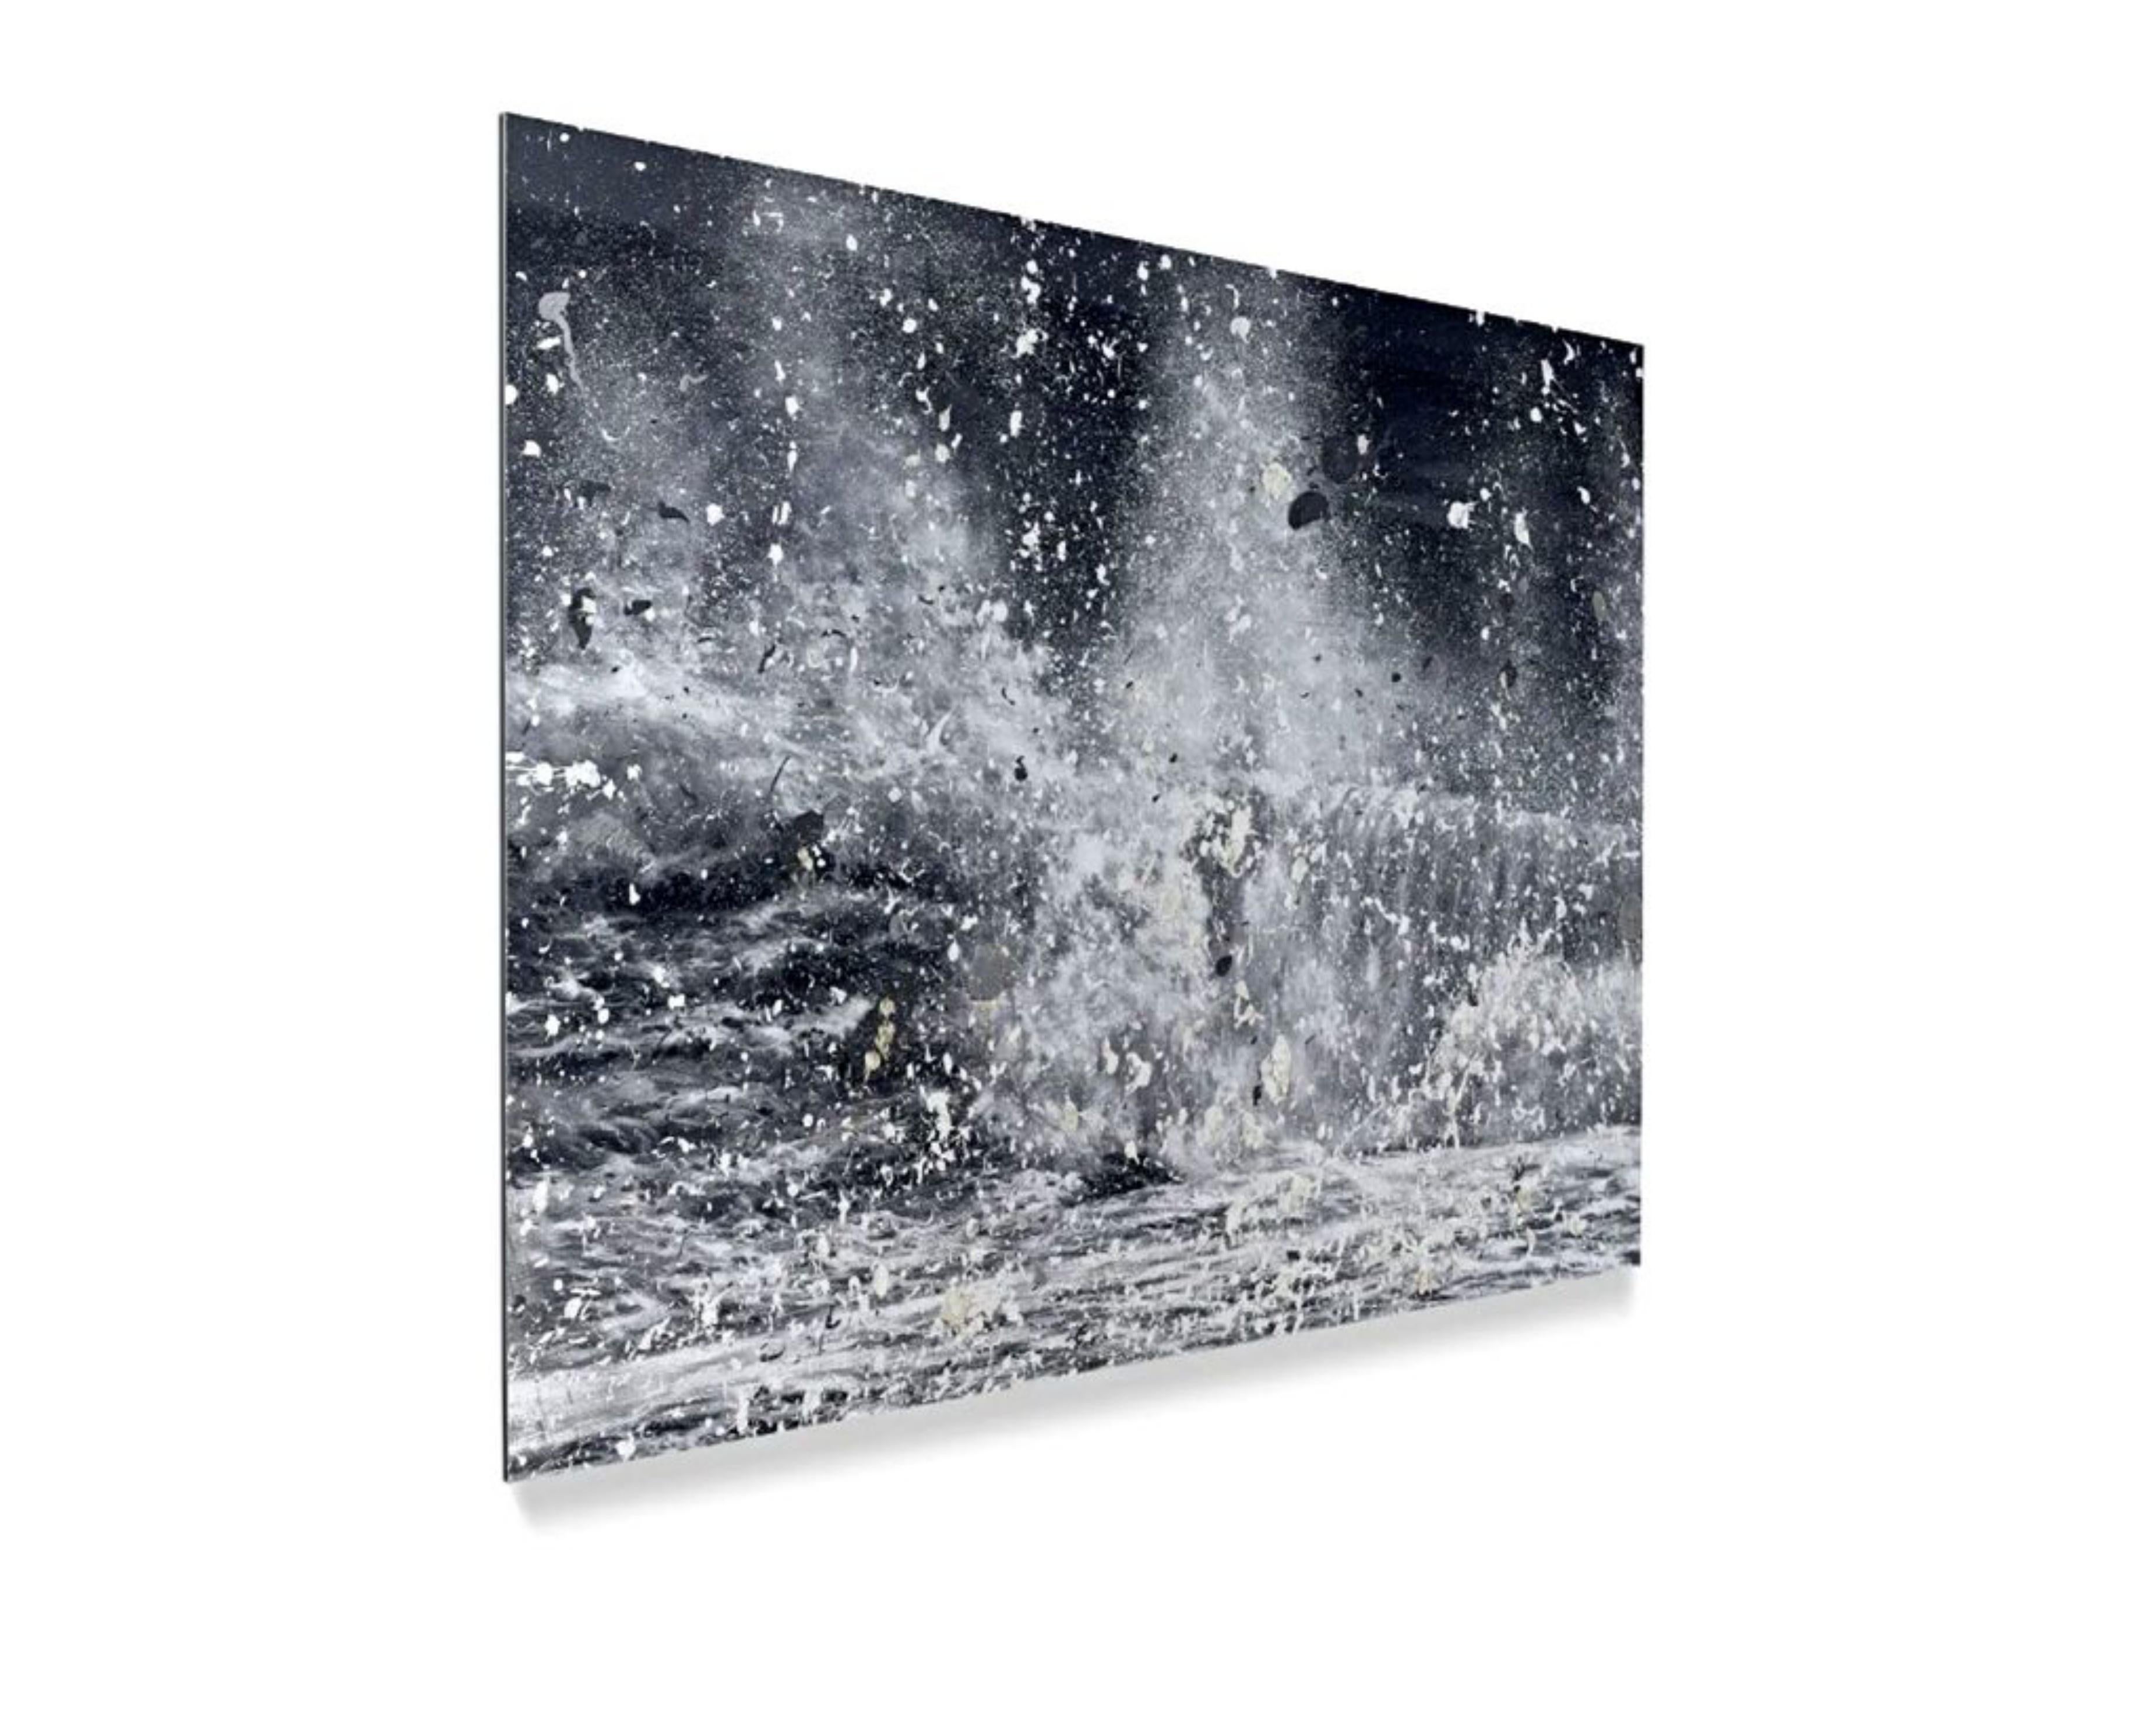 Blizzard (H13-10), from Where the Land Meets the Sea - Lt Ed hand signed - NEW - Print by Damien Hirst